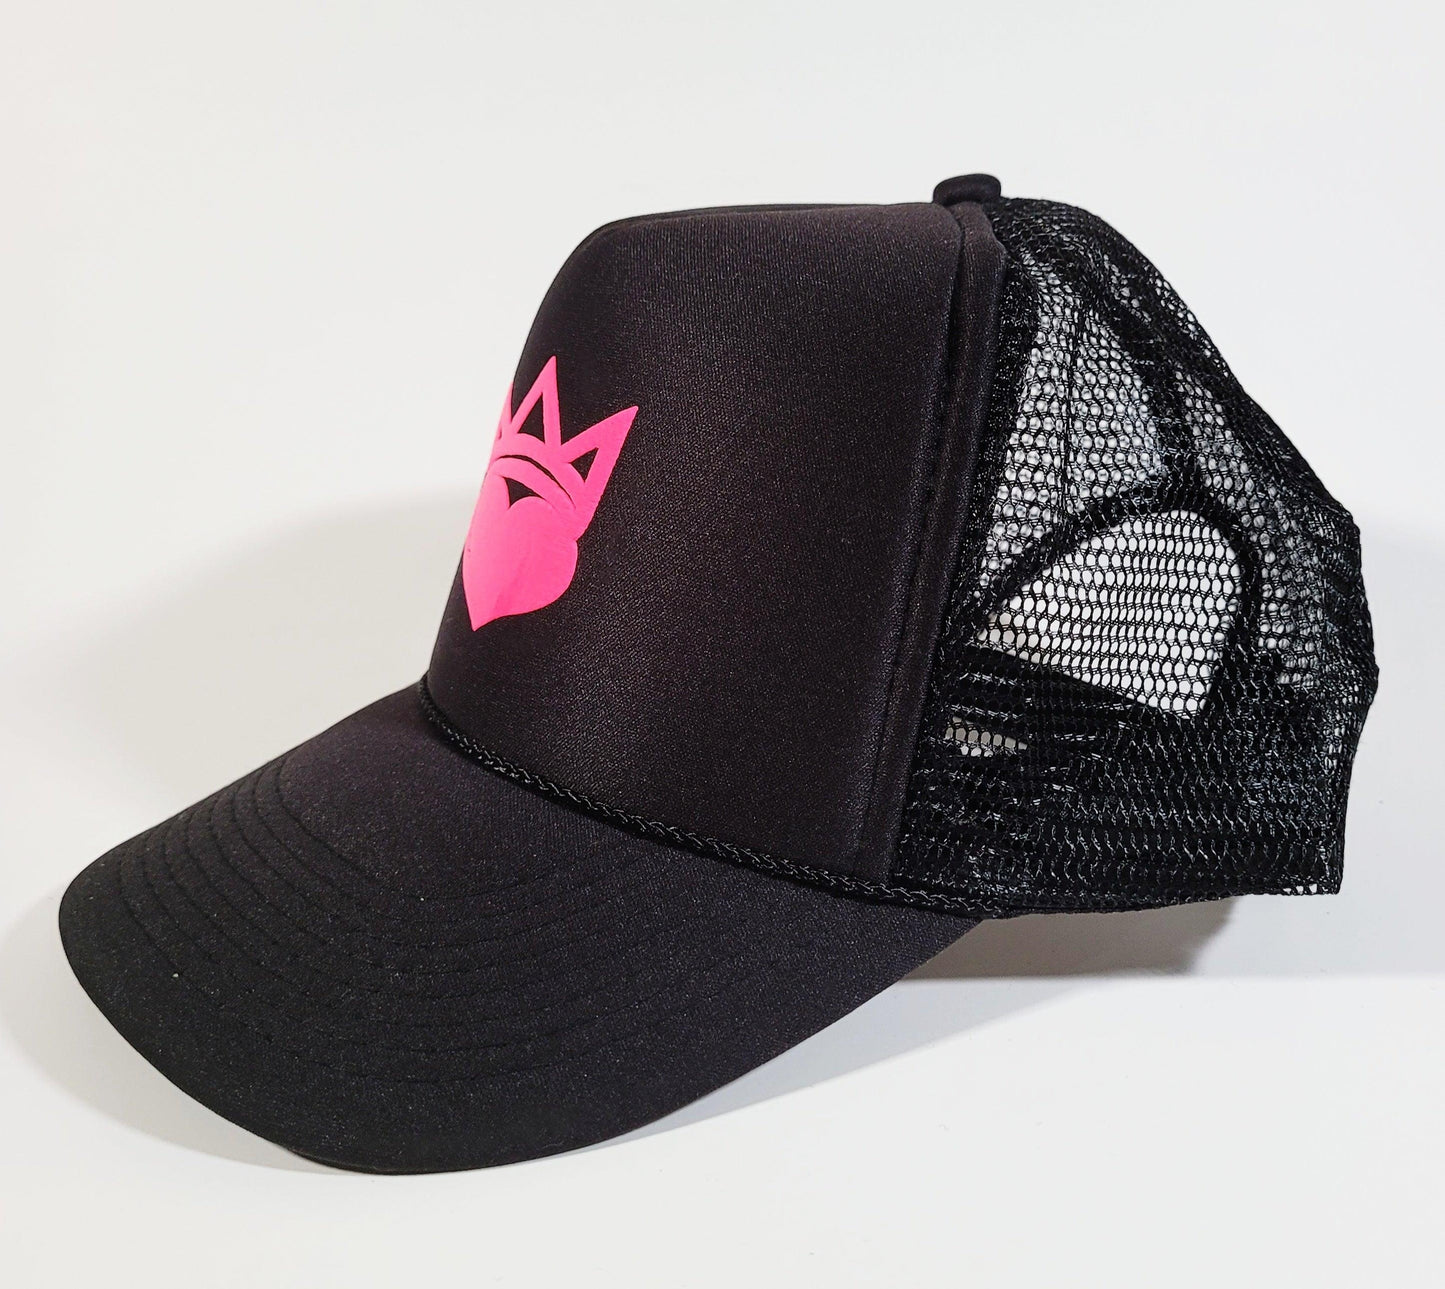 Black & Pink "King/Queen Of Hearts" Trucker Hat - Official Crown Store